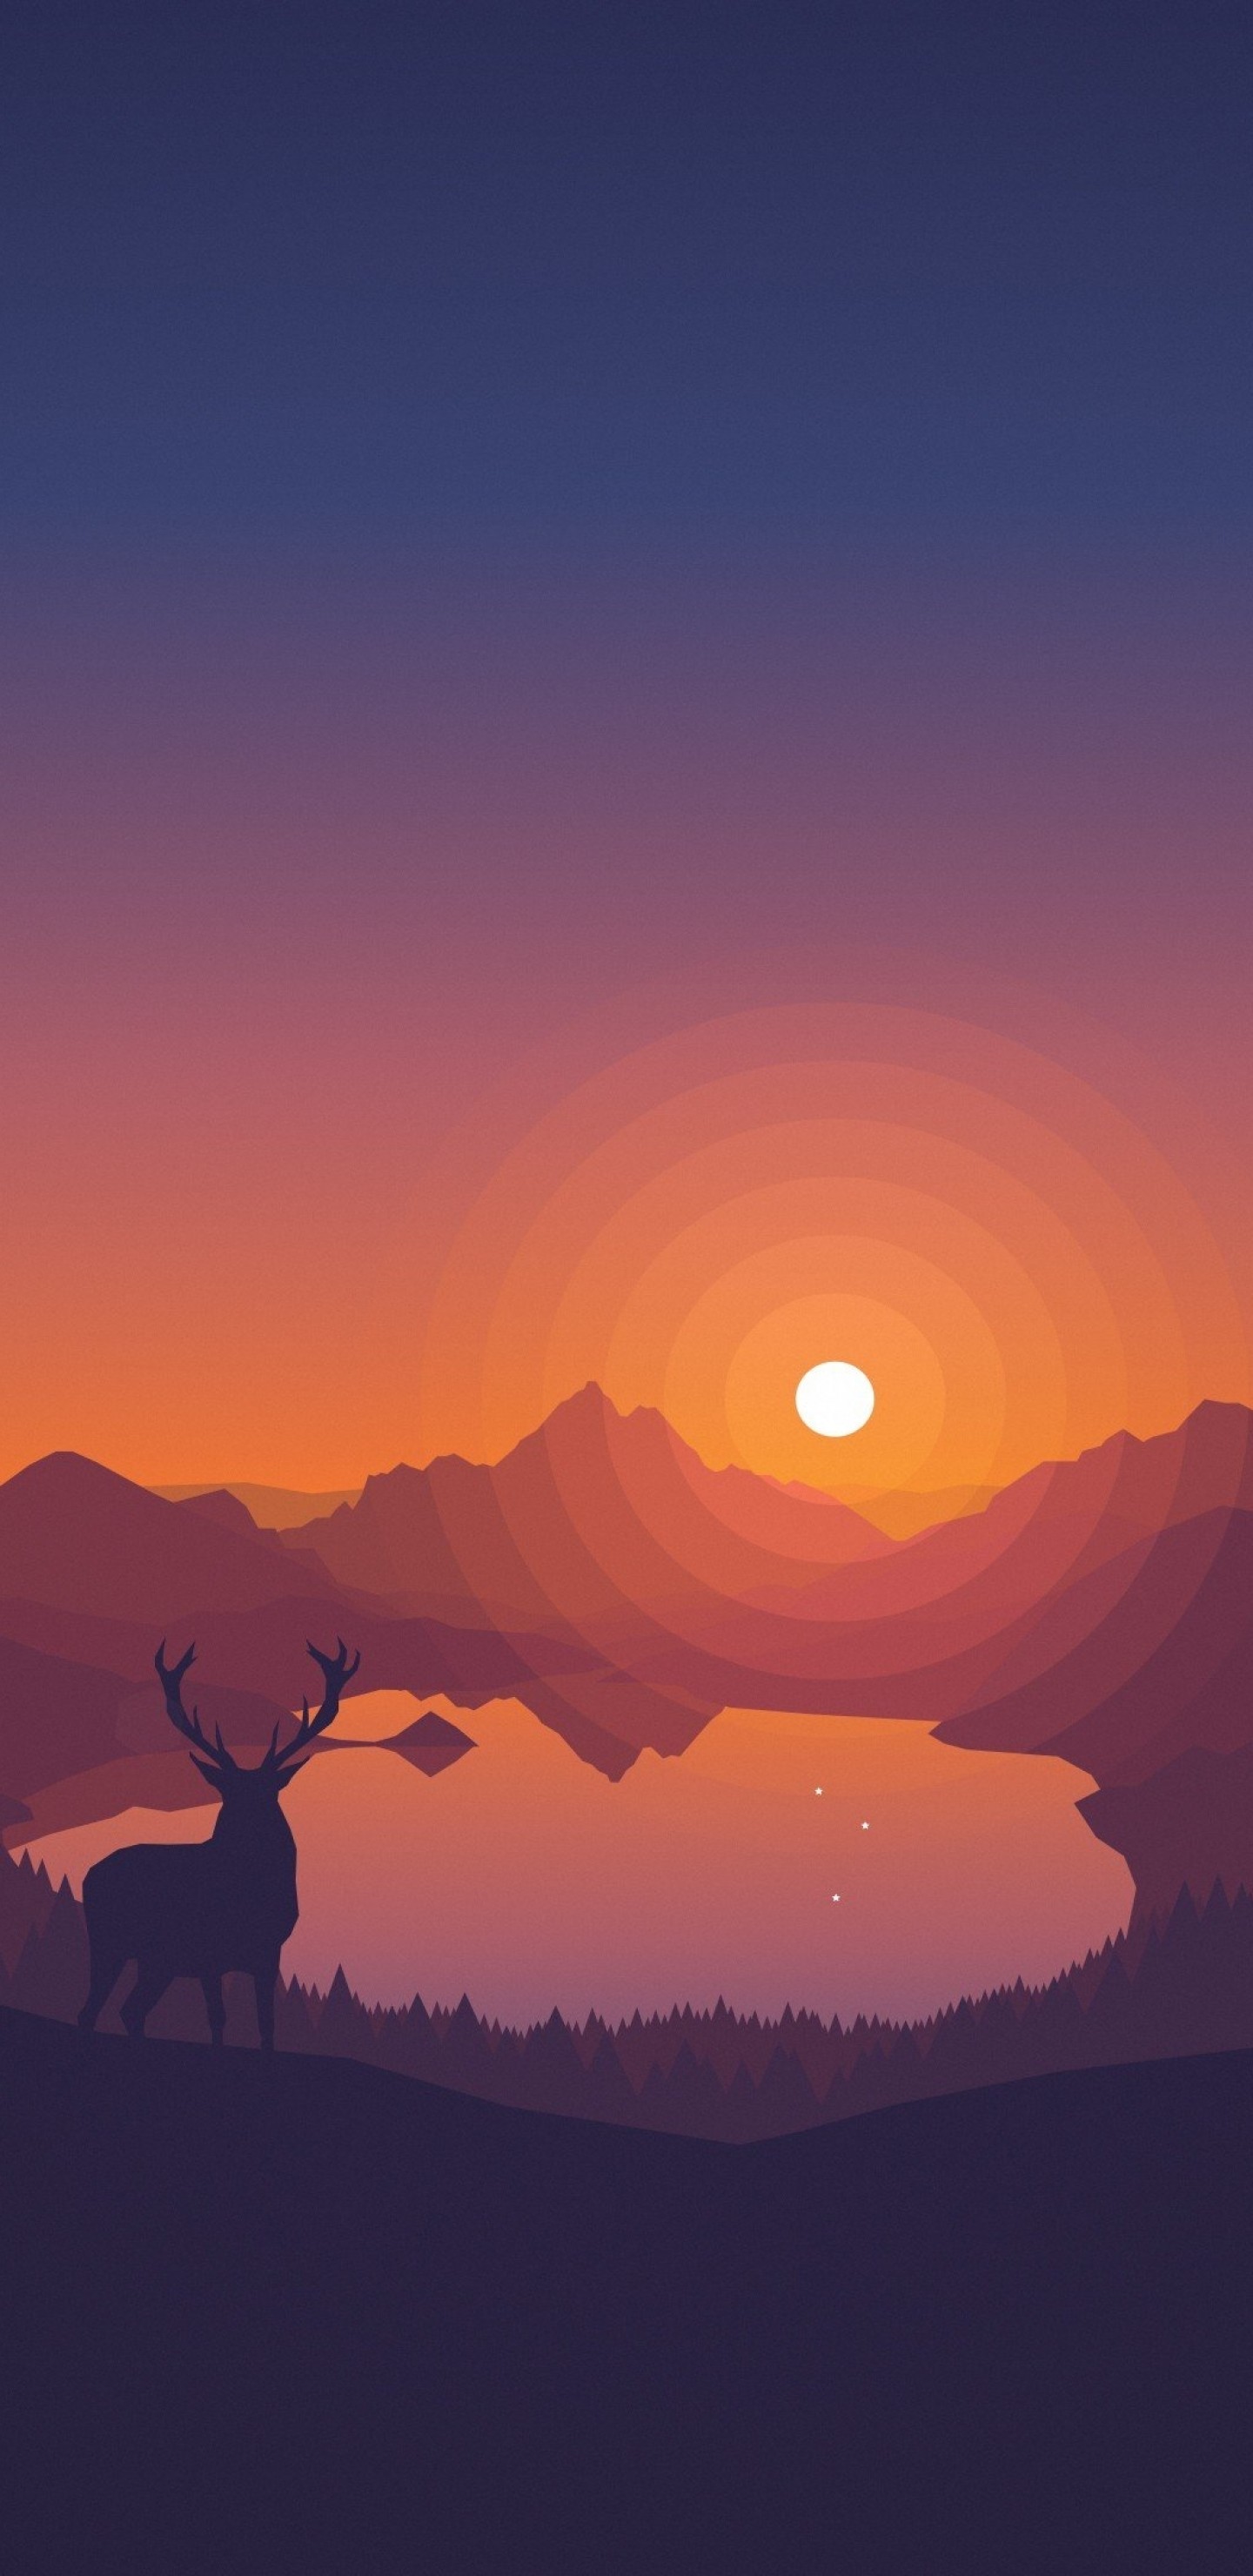 1440x2960 Minimalism, Scenic, Toon Colors, Deer, Sun, Forest, Trees, Mountain